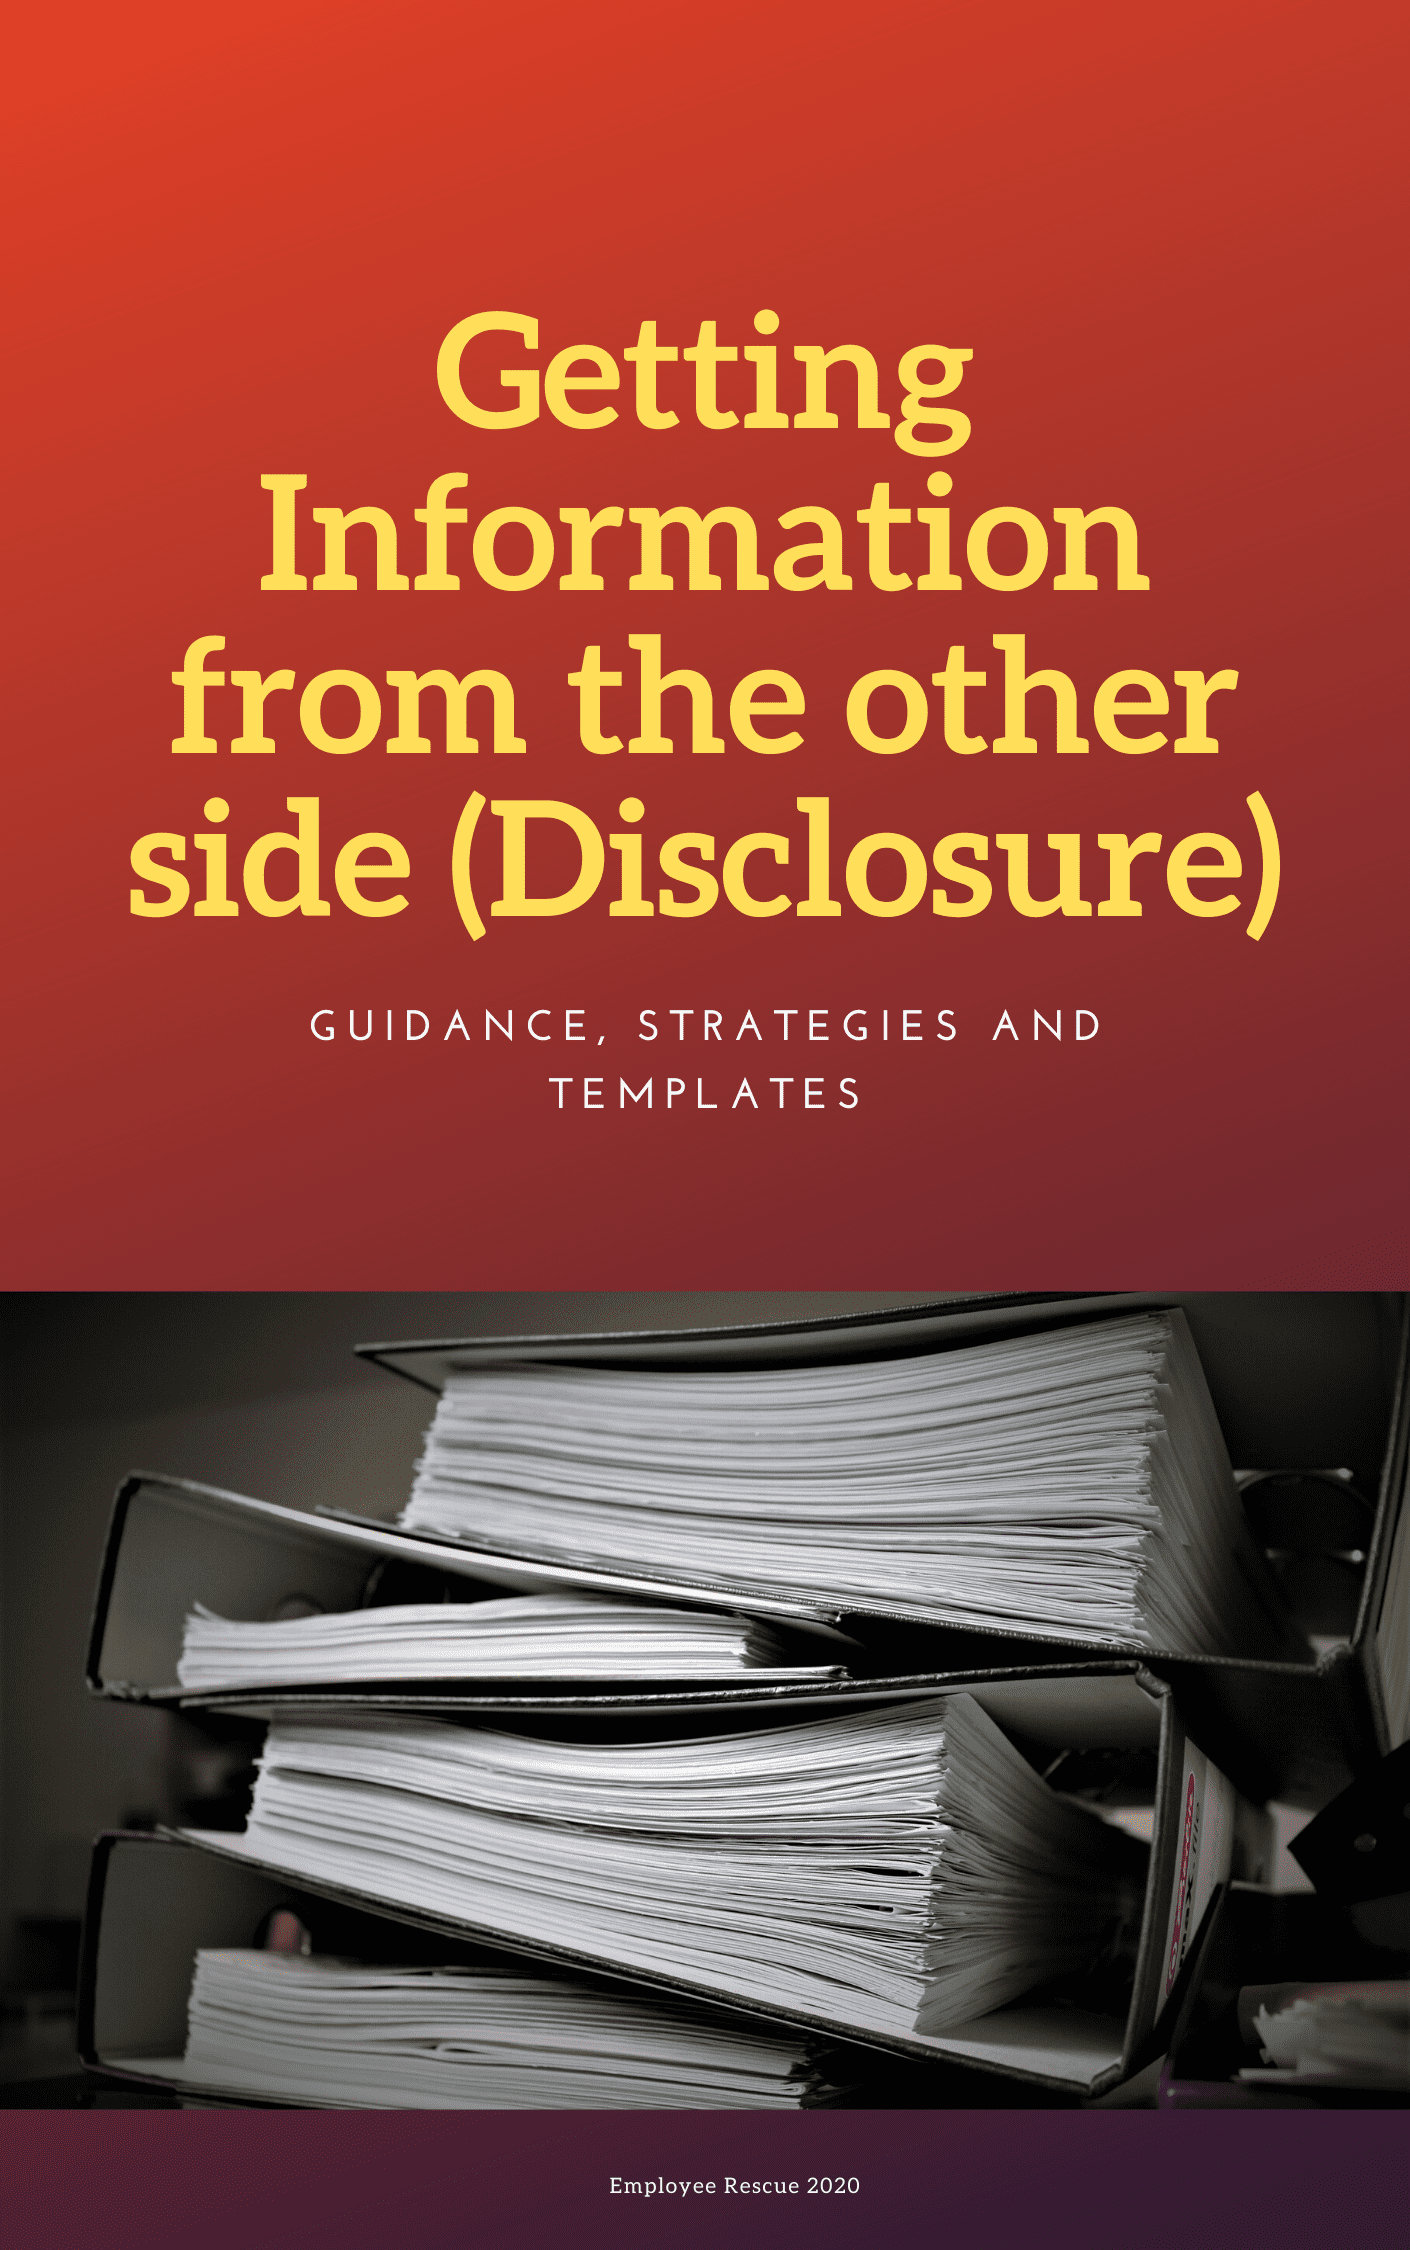 Getting Information From the Other Side (Disclosure)